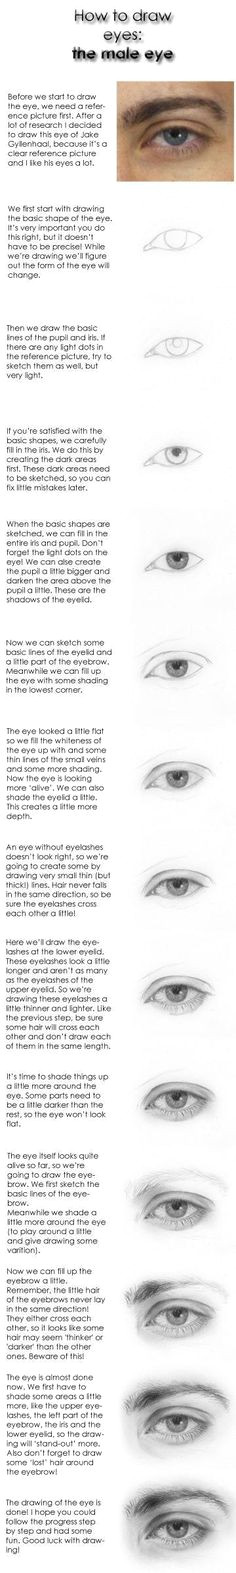 drawing lessons drawing techniques drawing tips drawing ideas eye sketch draw eyes eye tutorial sketch painting how to draw men